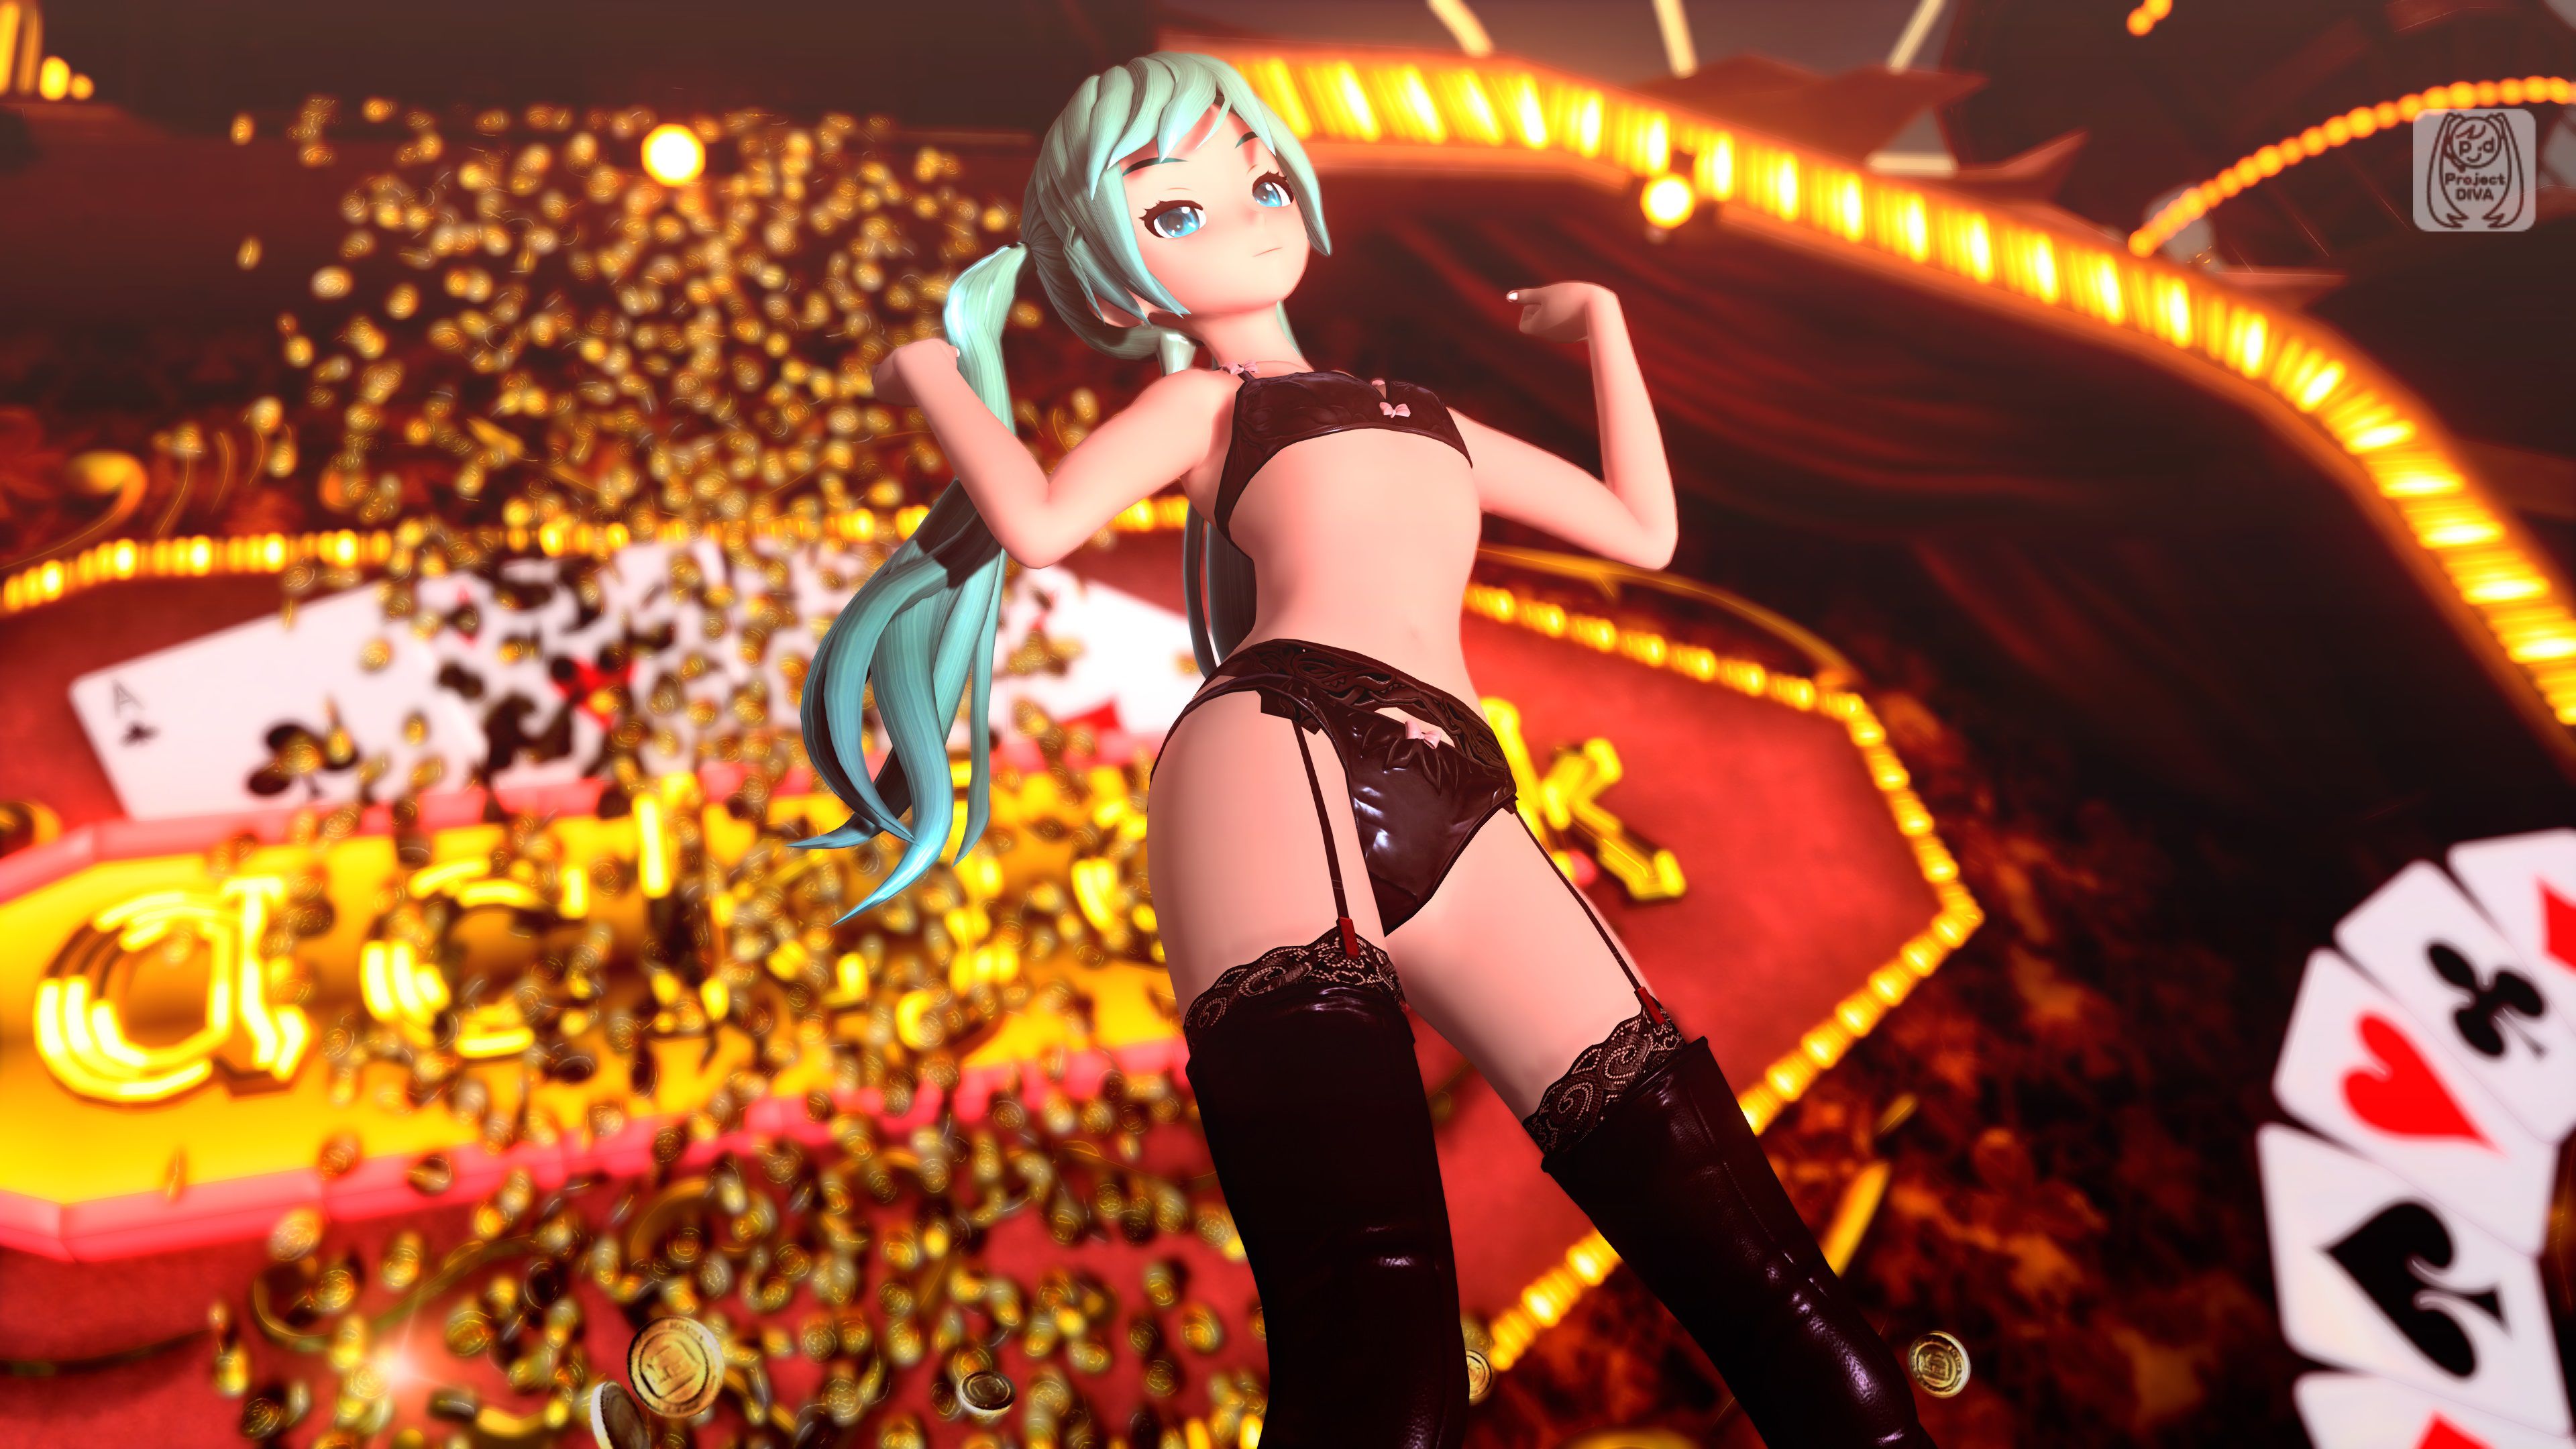 【Sad news】Hatsune Miku's new sound game is immediately taken off by the mod 11